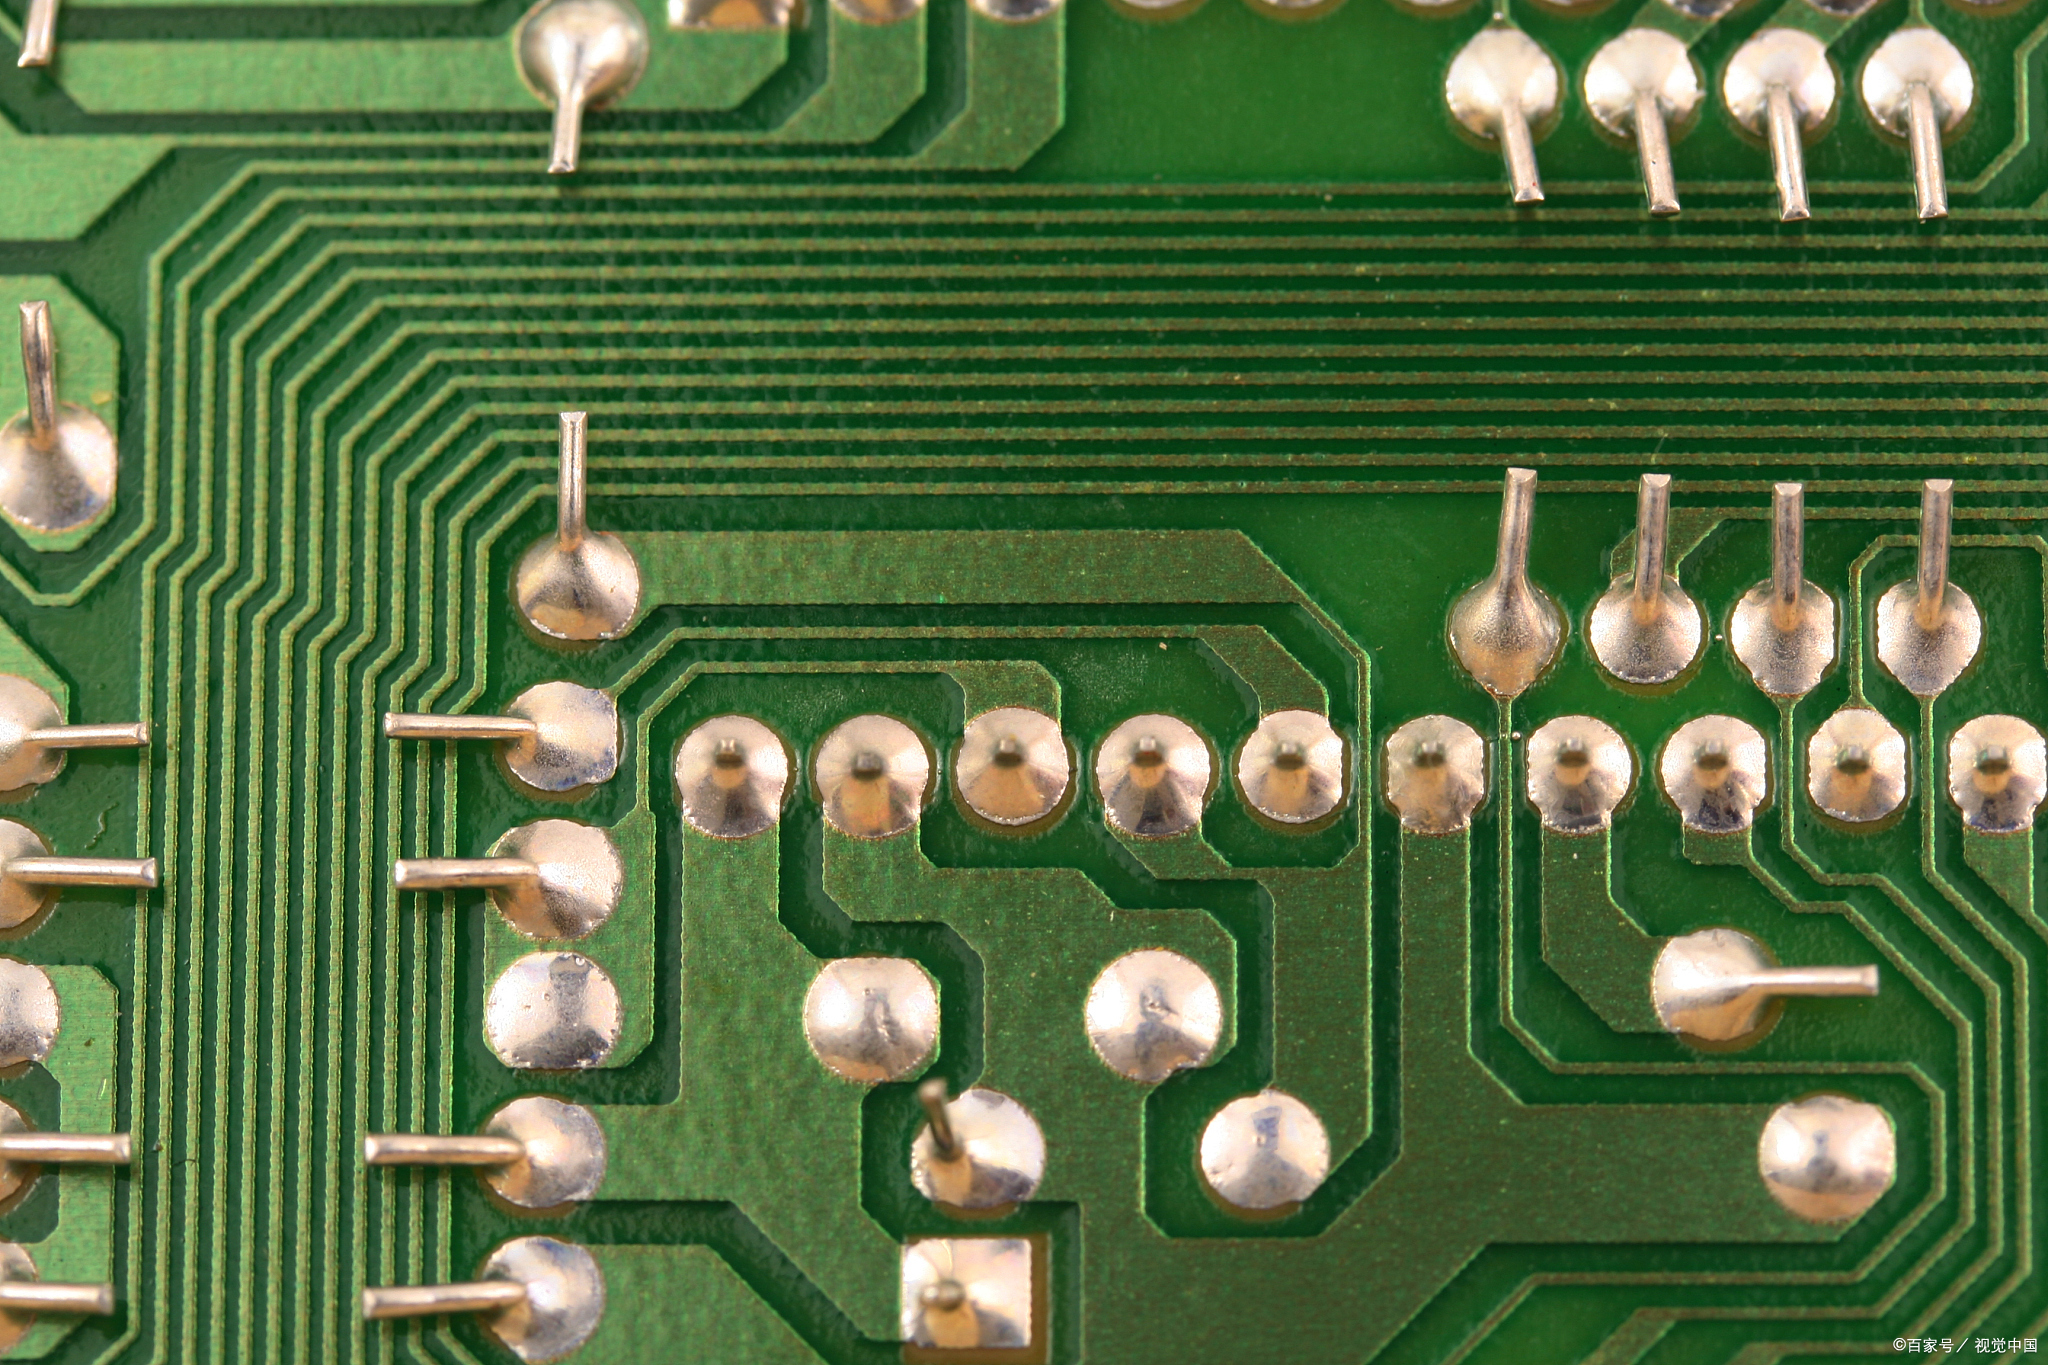 Explanation of several major requirements for PCB processing and production